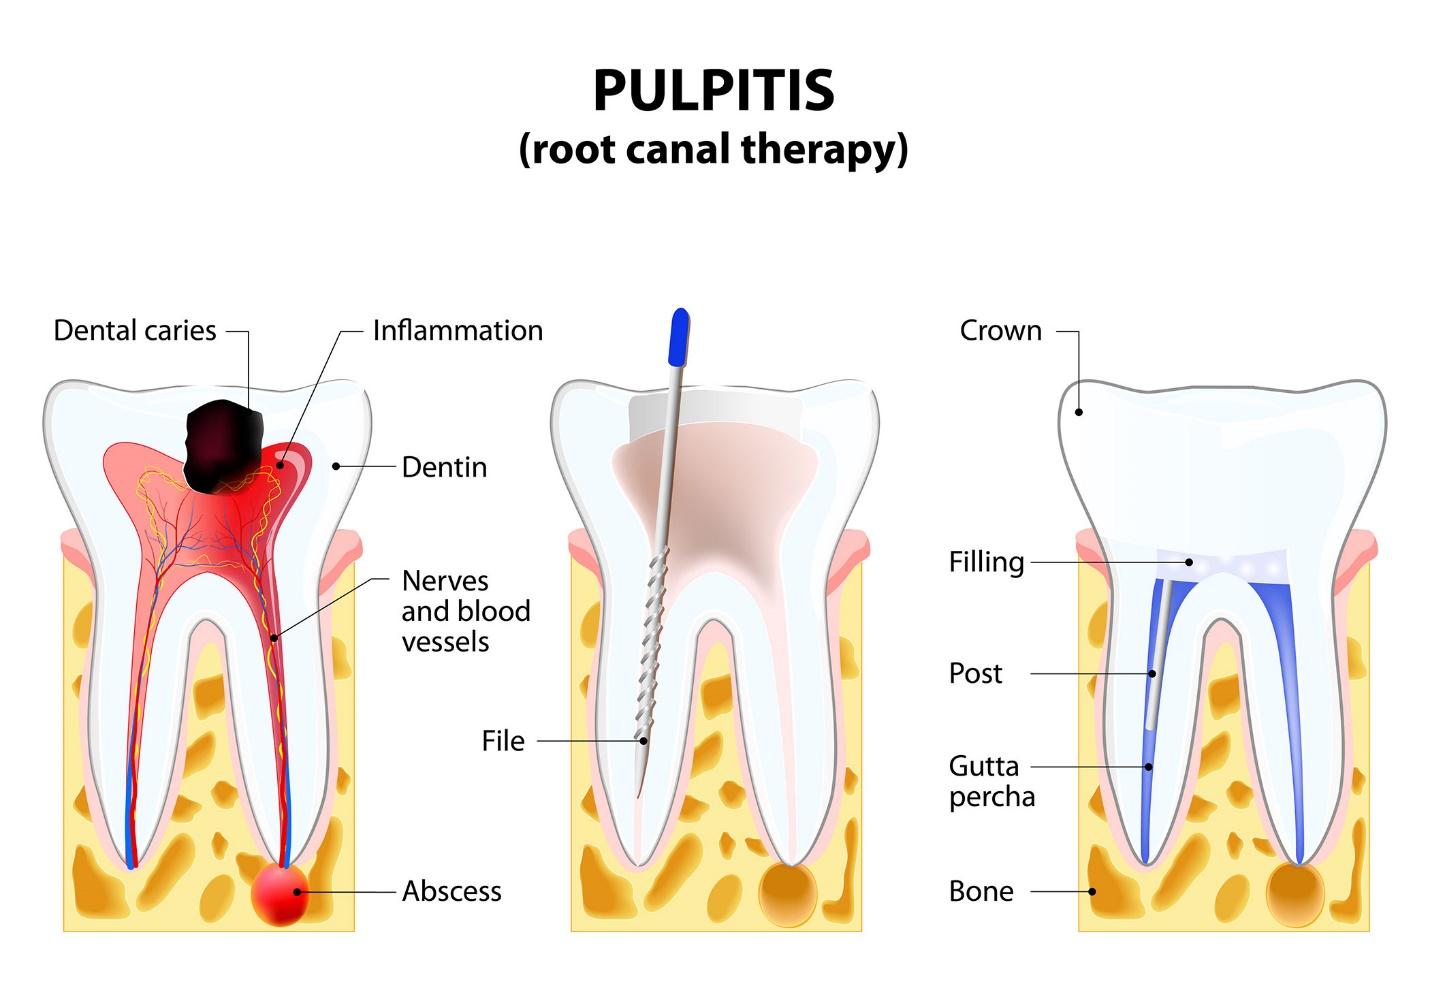 5 Must-Know Facts About Root Canal Treatment